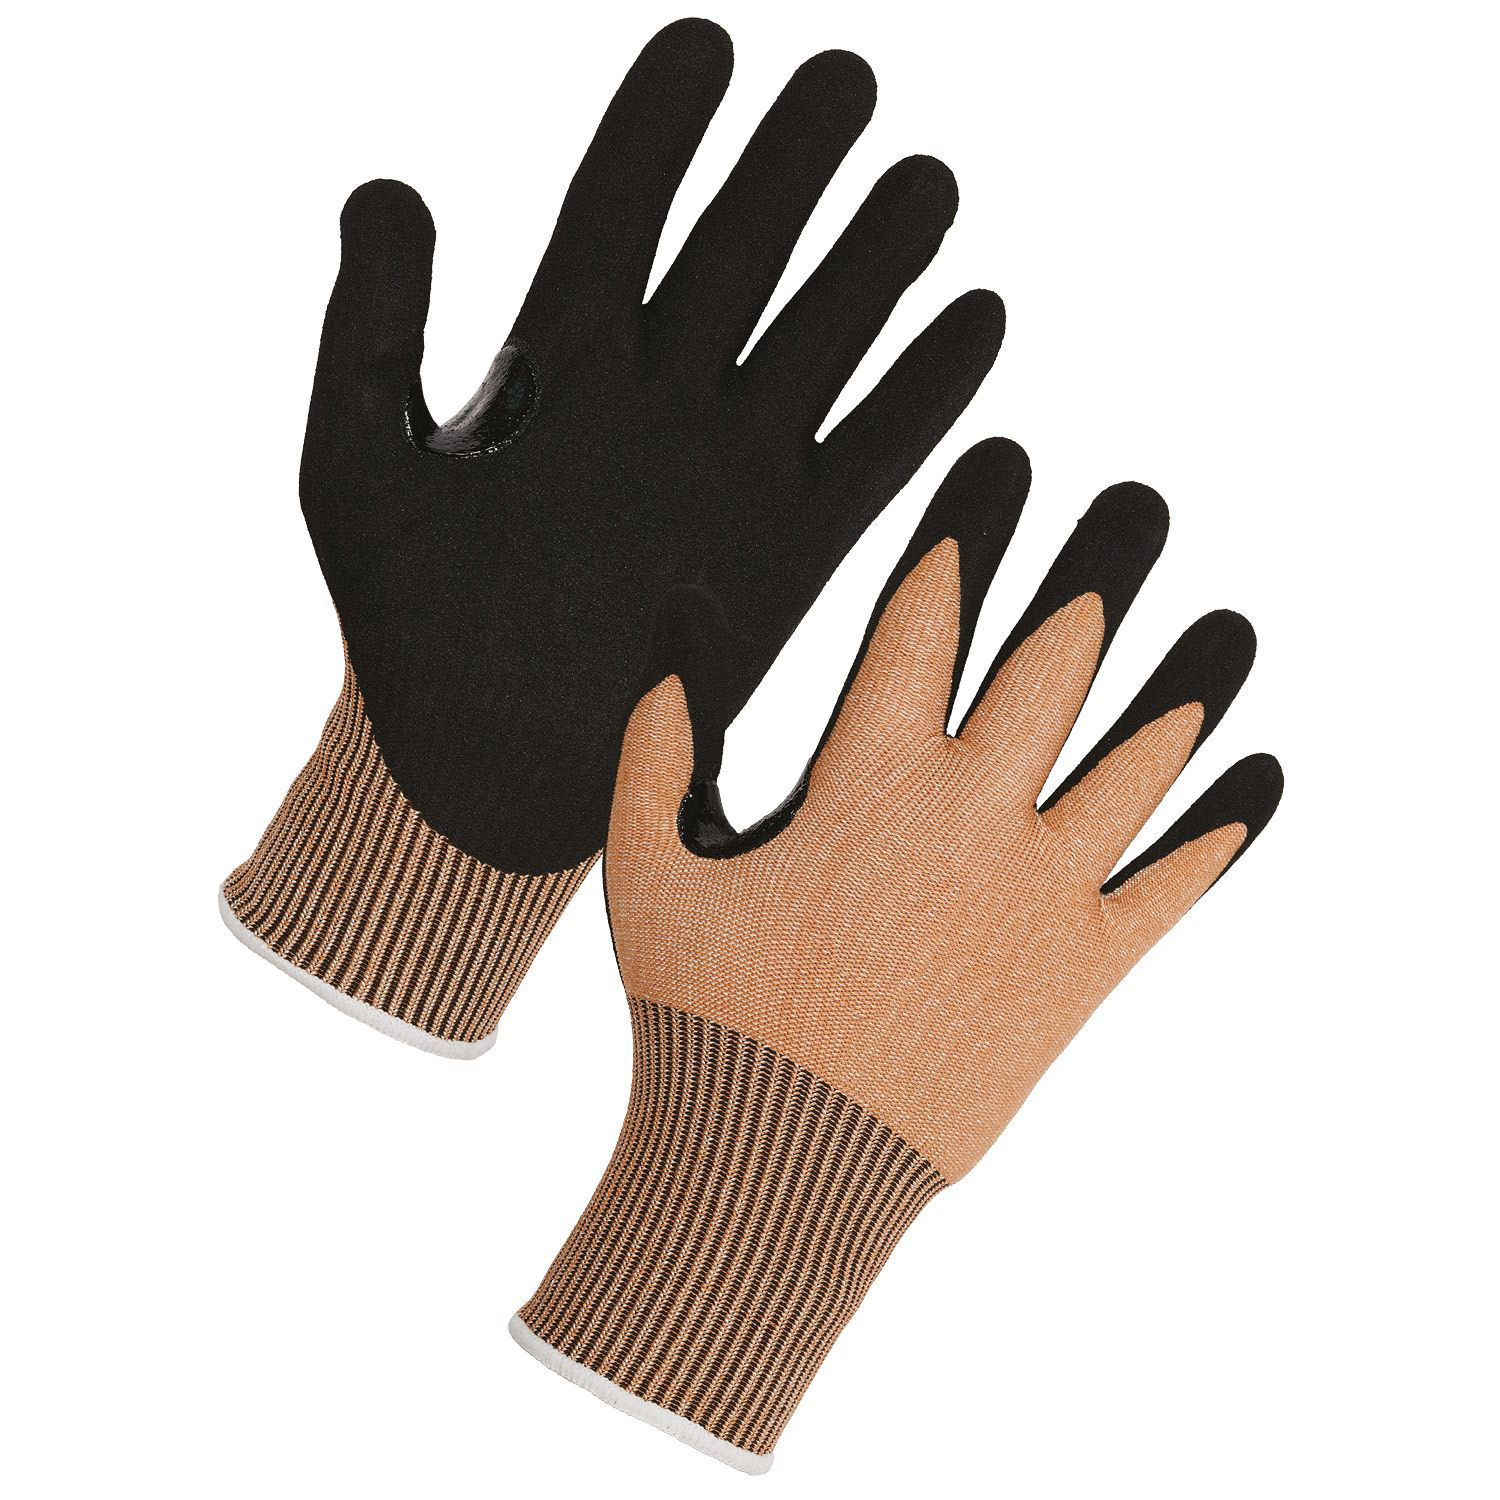 Heavy Duty Durable Cut-Resistant Gloves with Superior Level 4